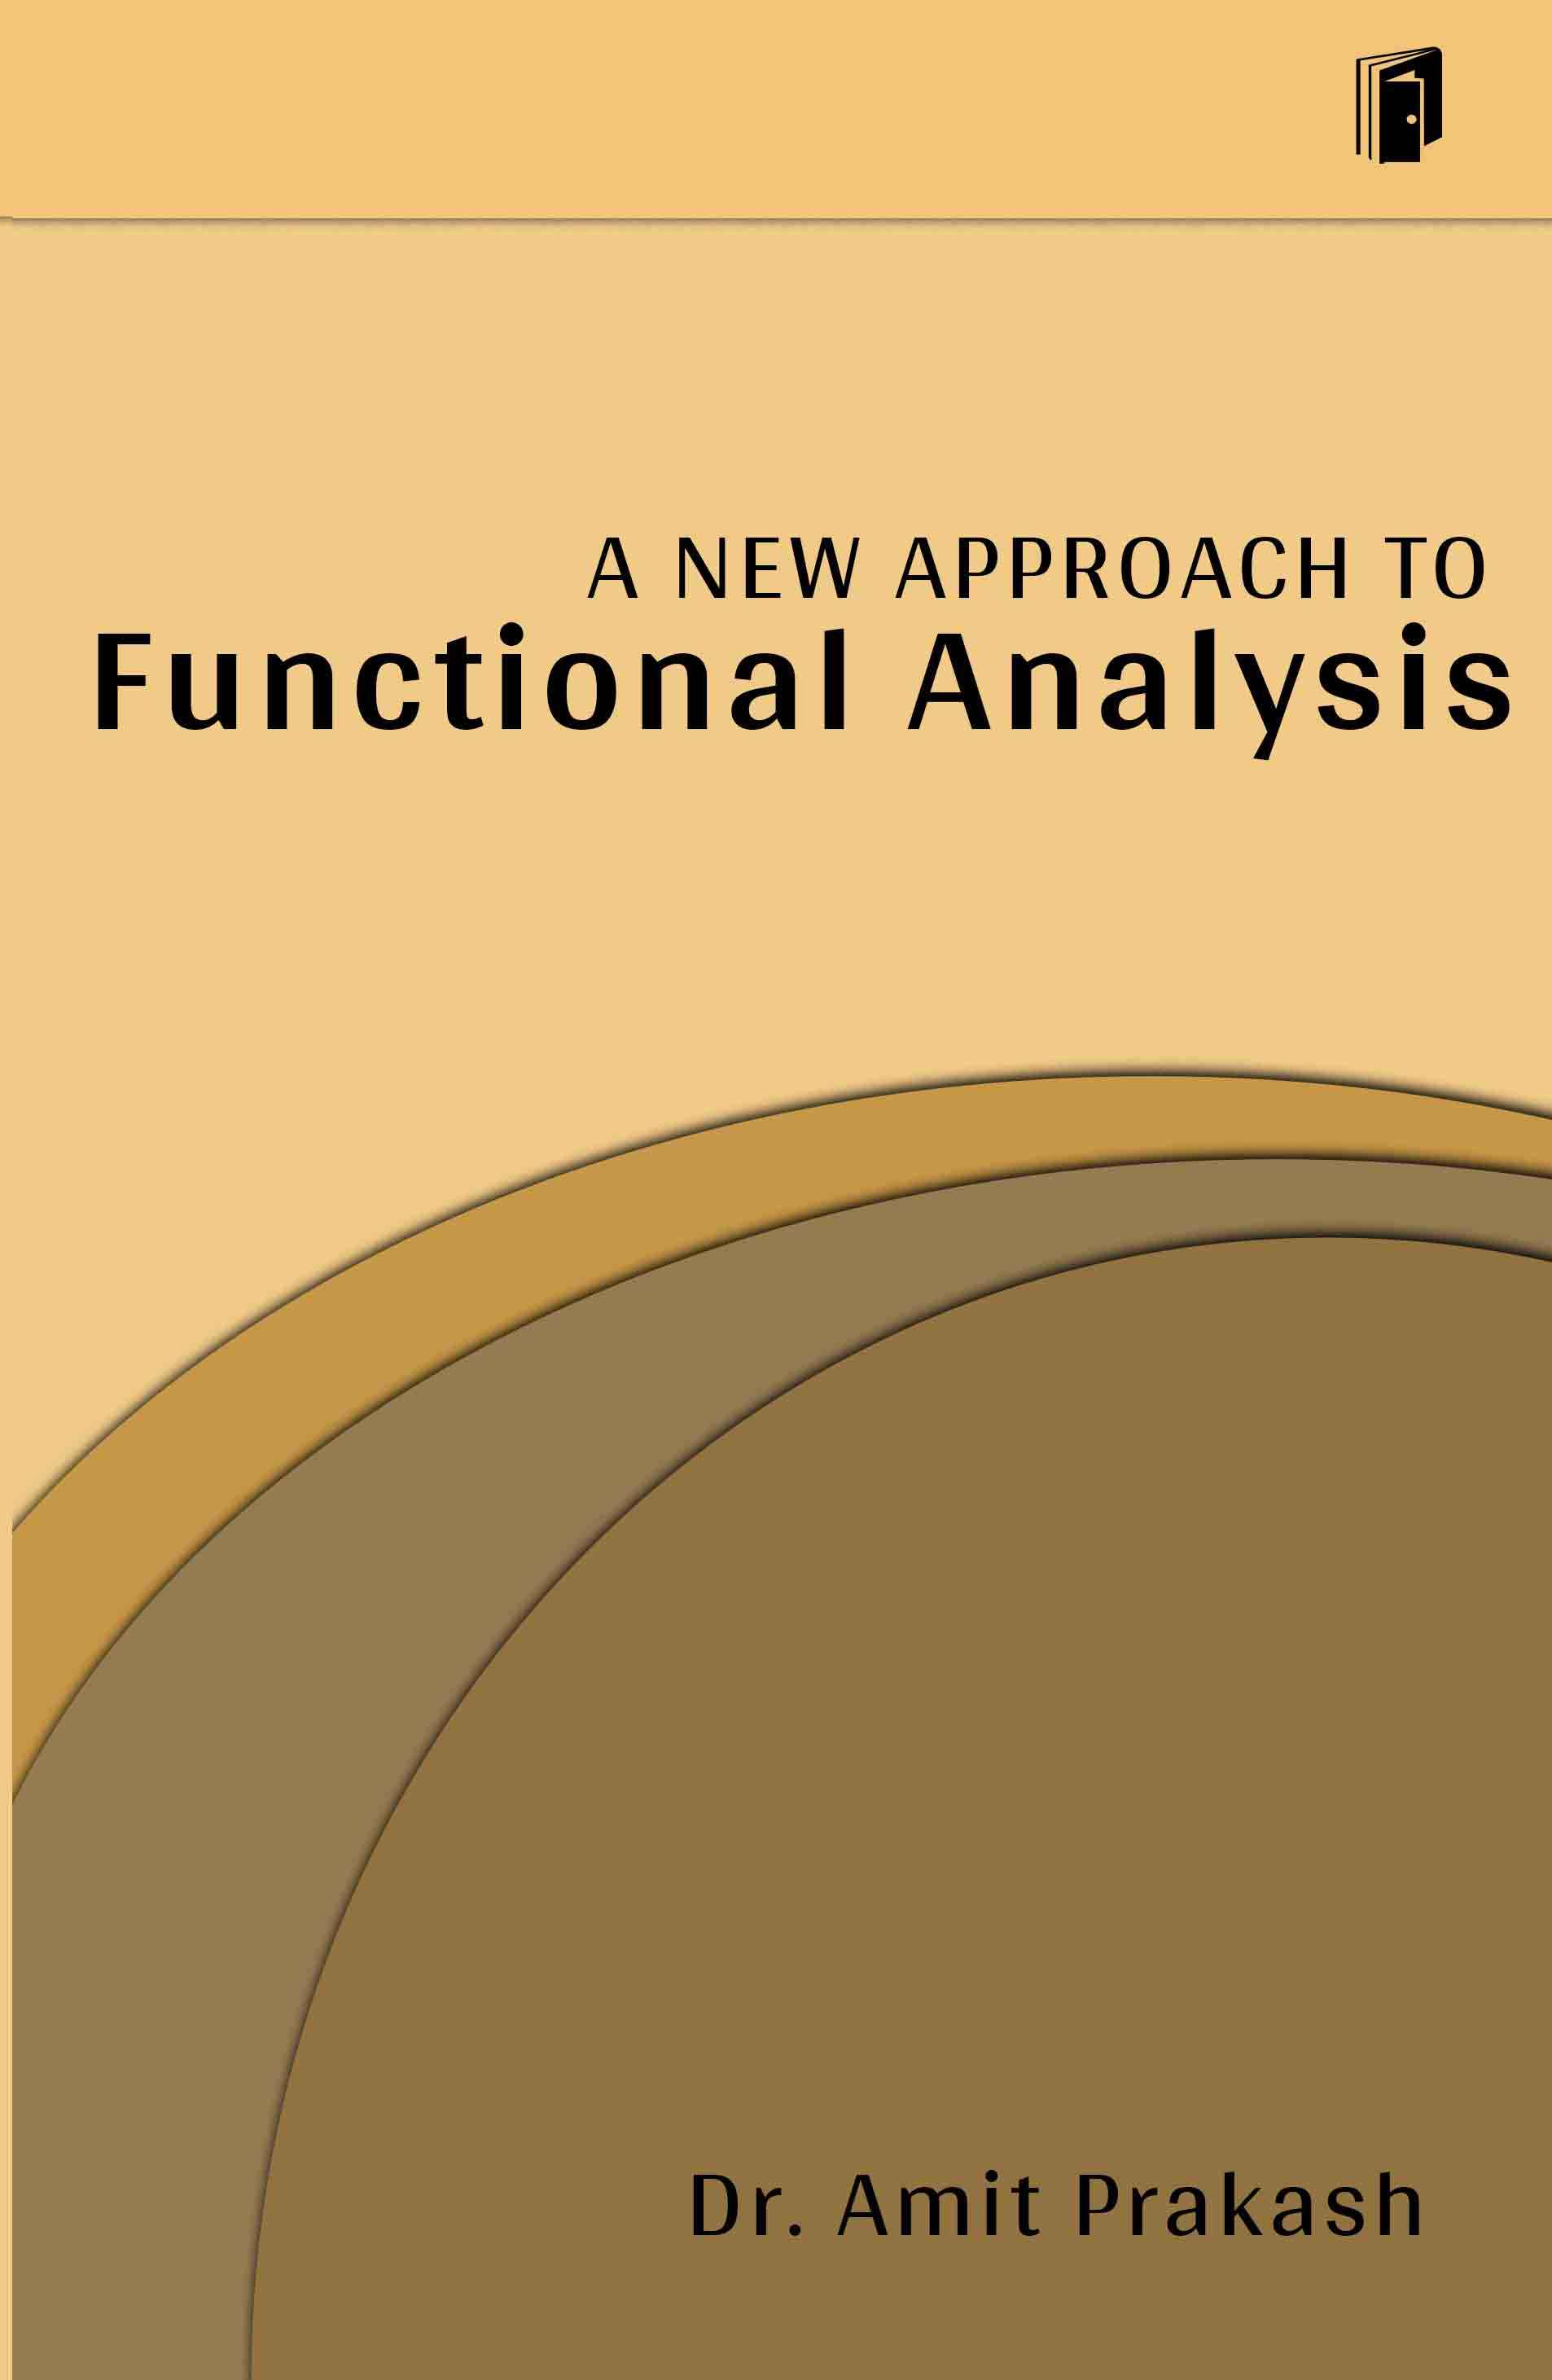 A NEW APPROACH TO FUNCTIONAL ANALYSIS